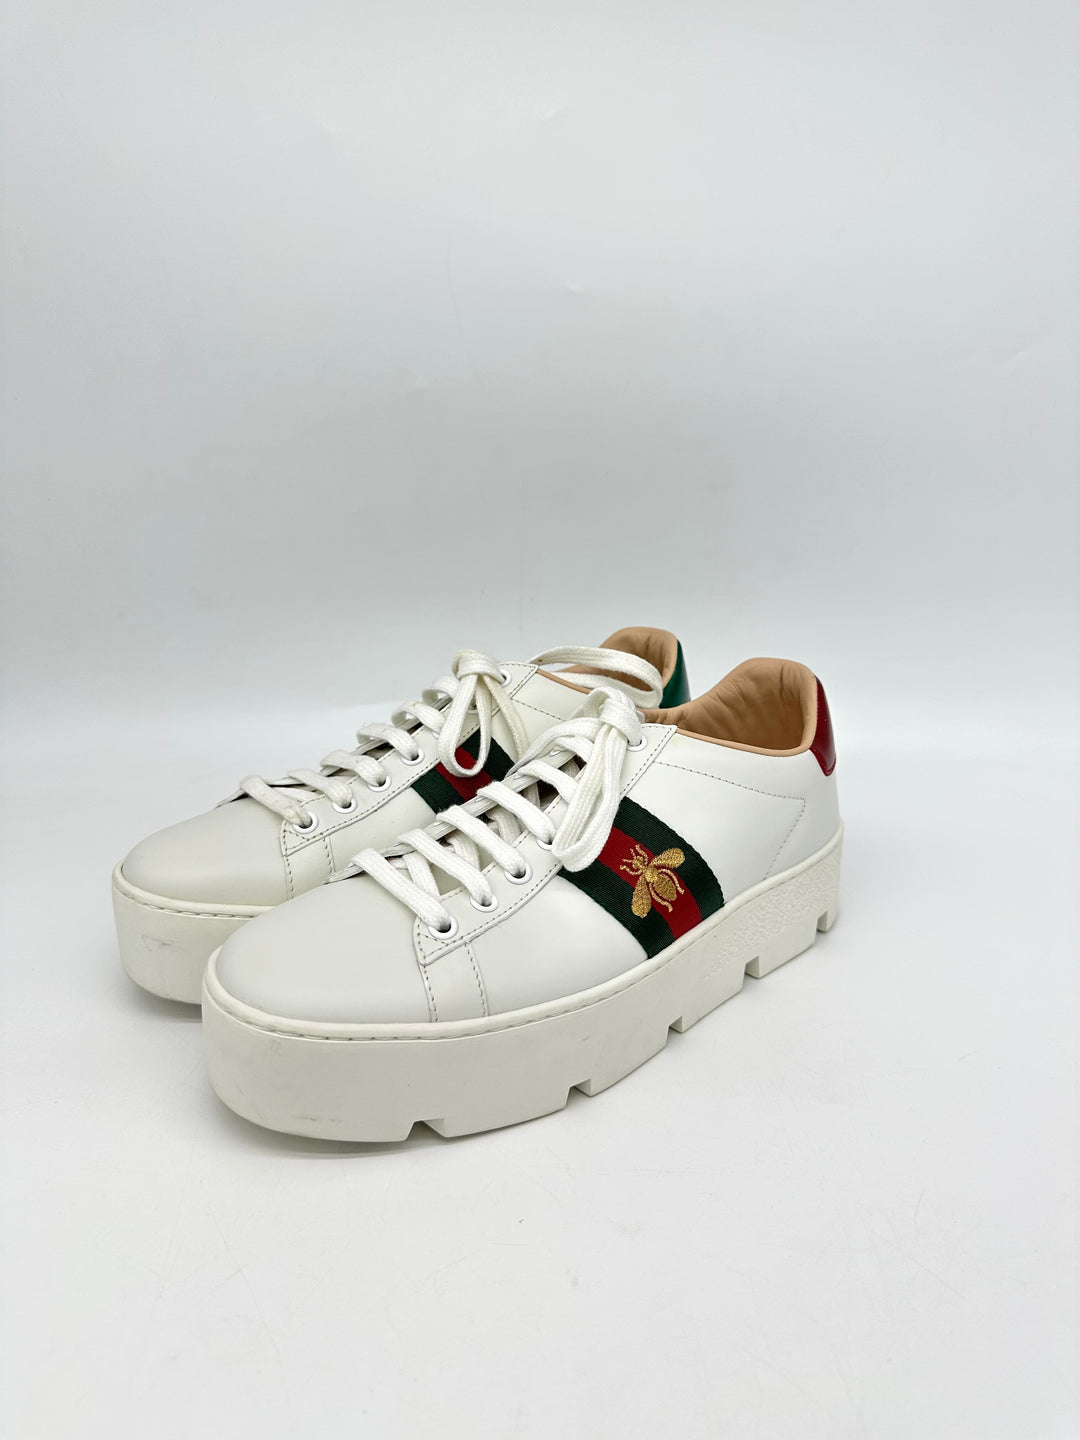 GUCCI White Leather Embroidered Bee Ace Platform Sneakers Size 39